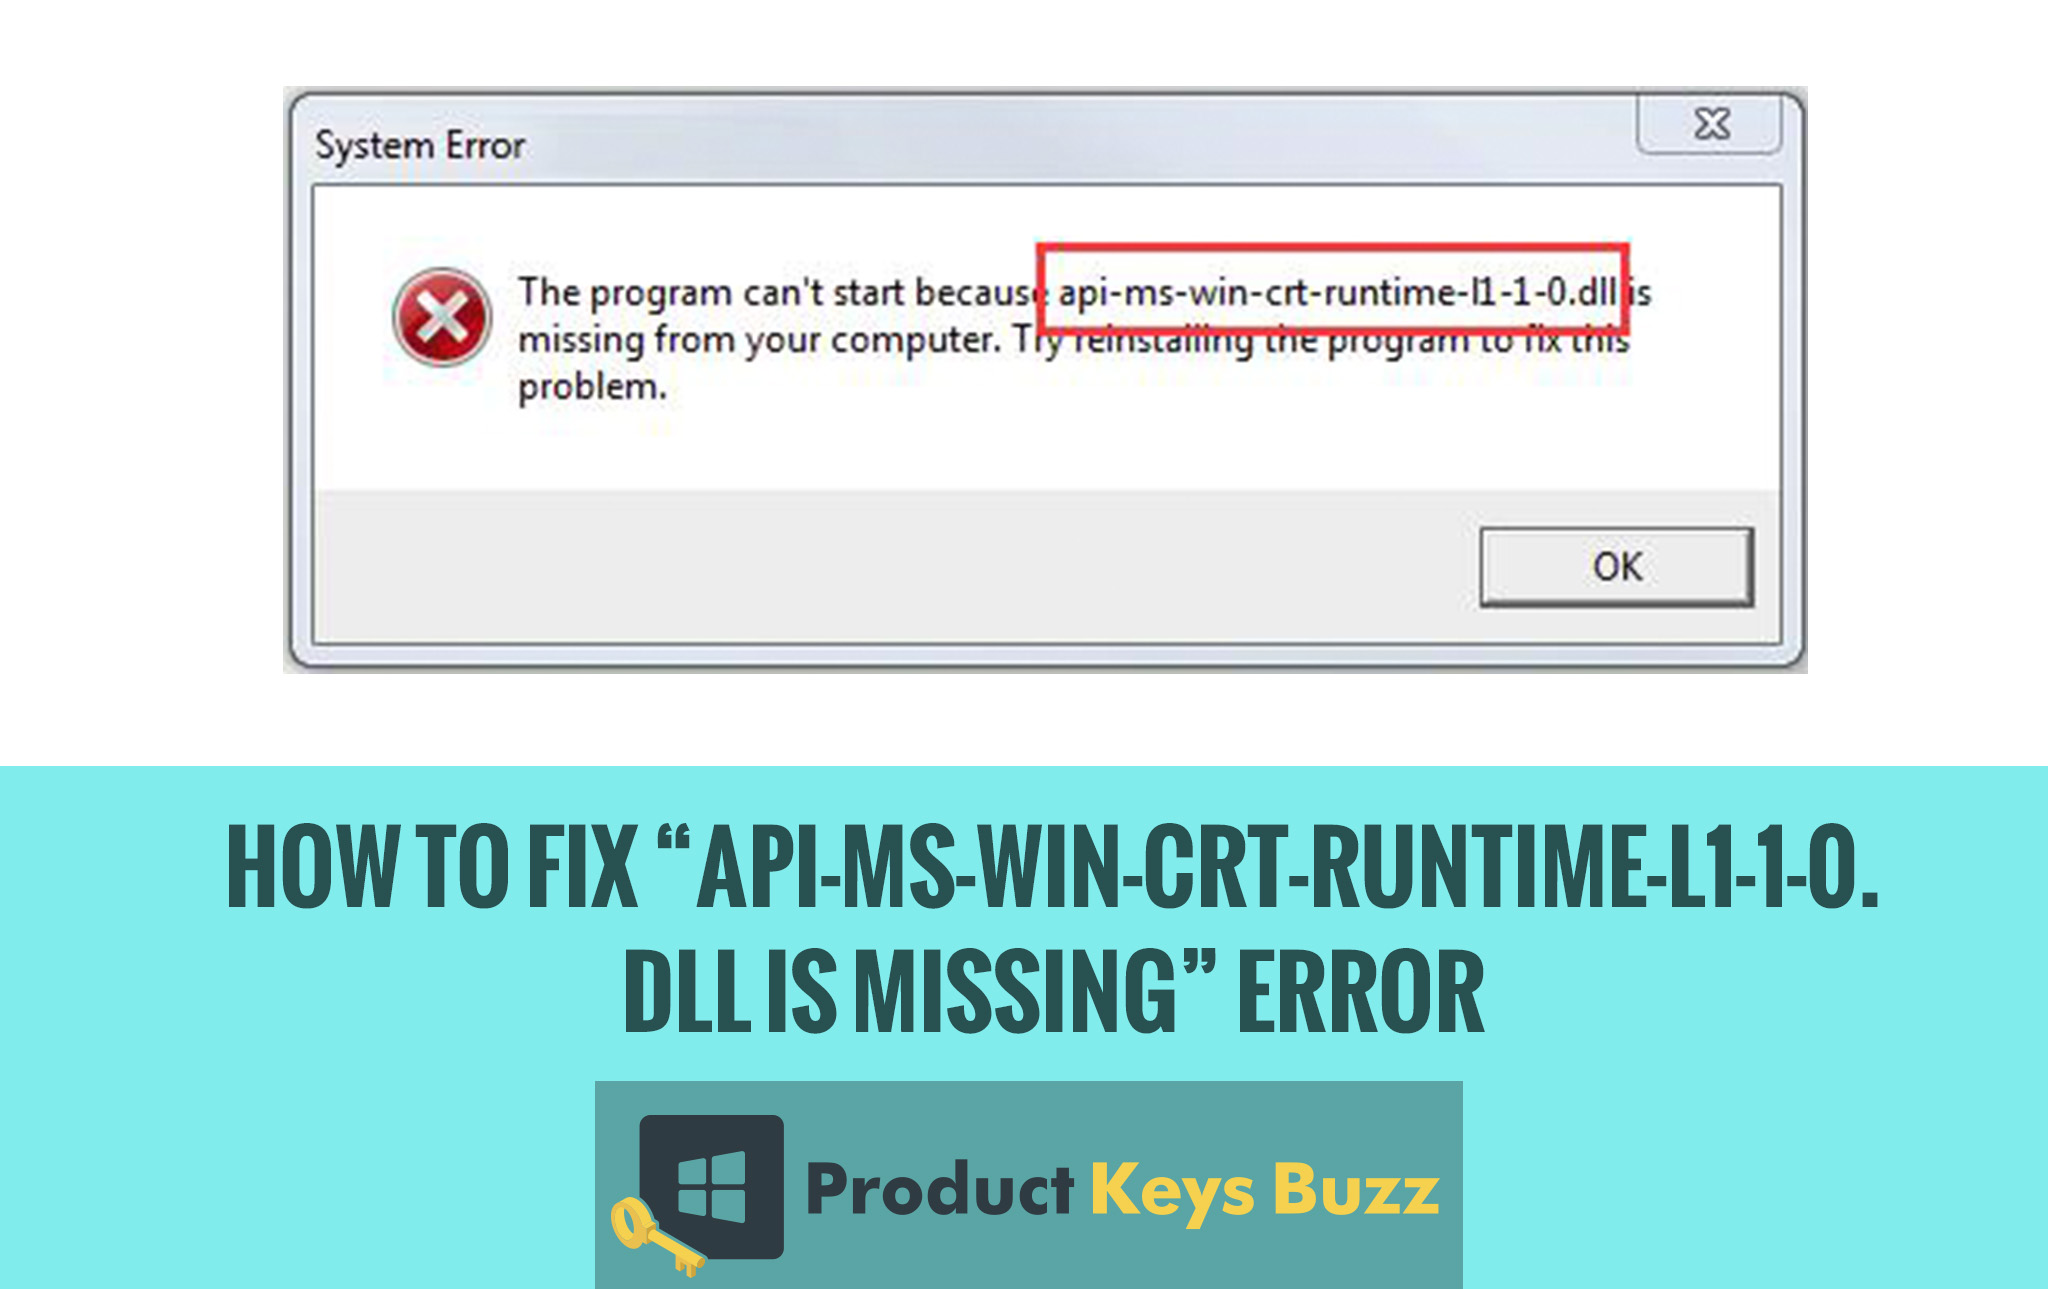 How to Fix “API-ms-win-crt-runtime-l1-1-0.dll is missing” Error